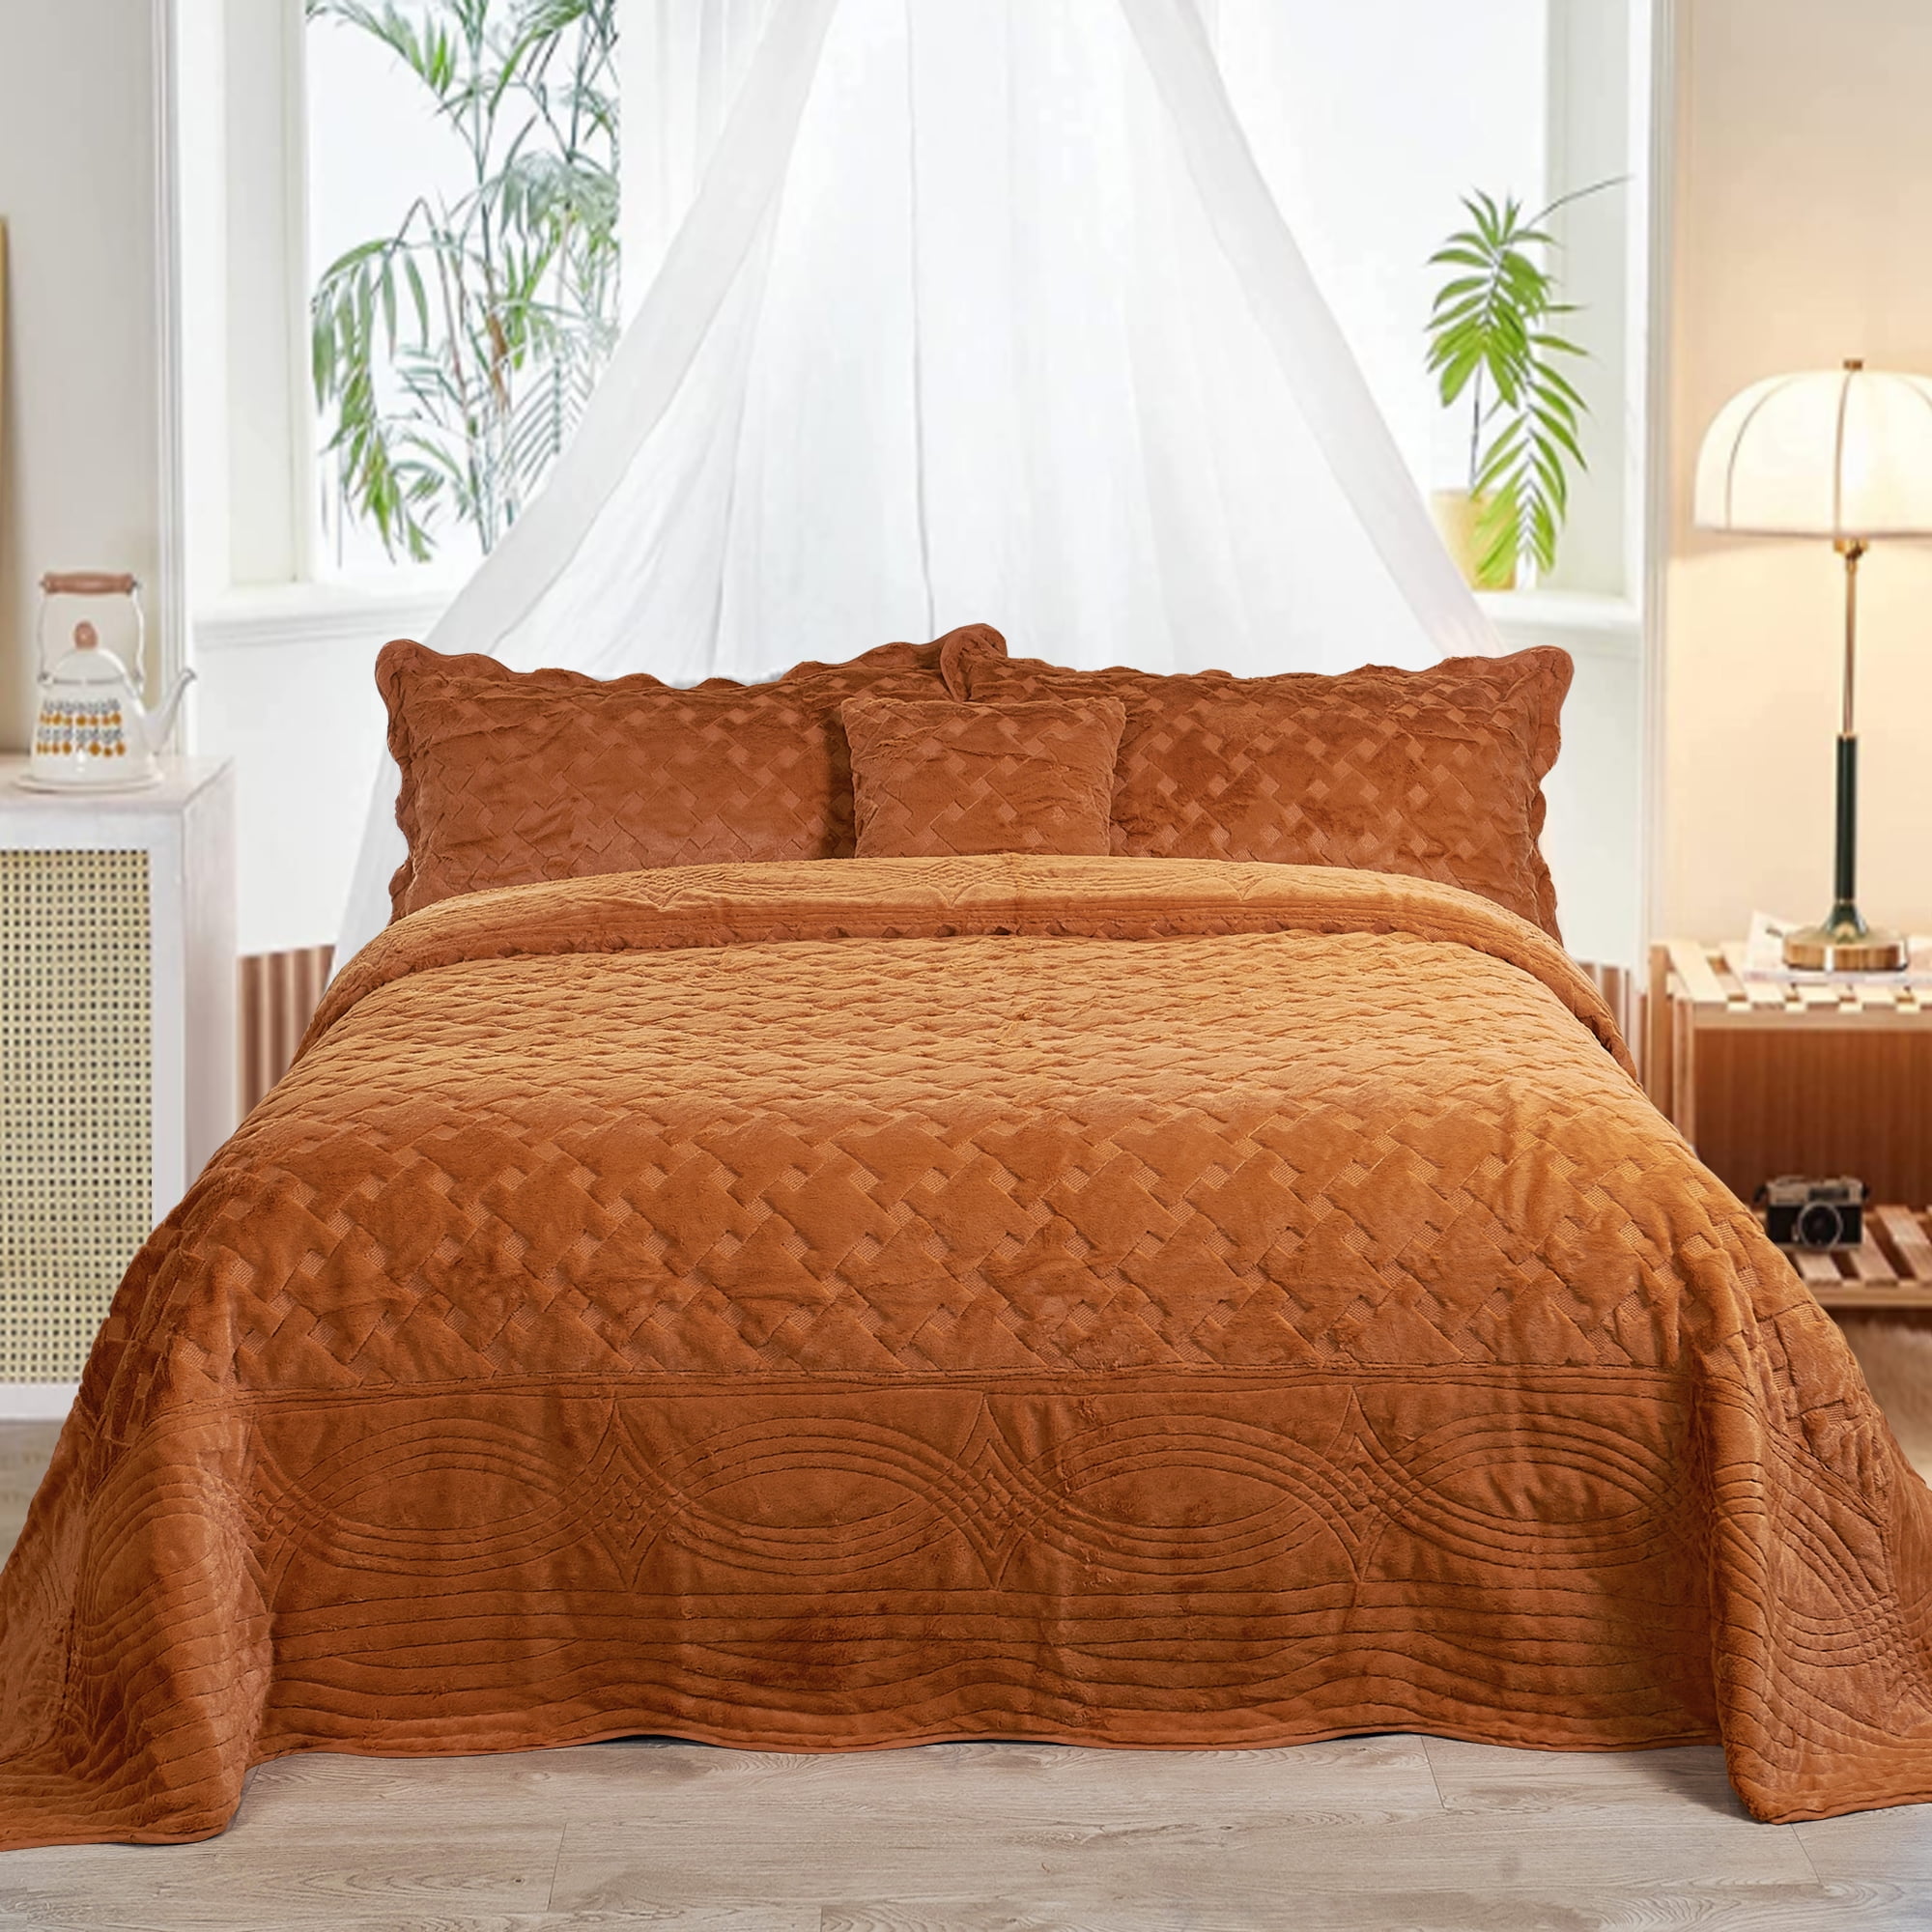 Home Soft Things 4 Piece Tatami Quilted Faux Fur Bedspread - Apricot -  Oversize Queen (110 x 120) 